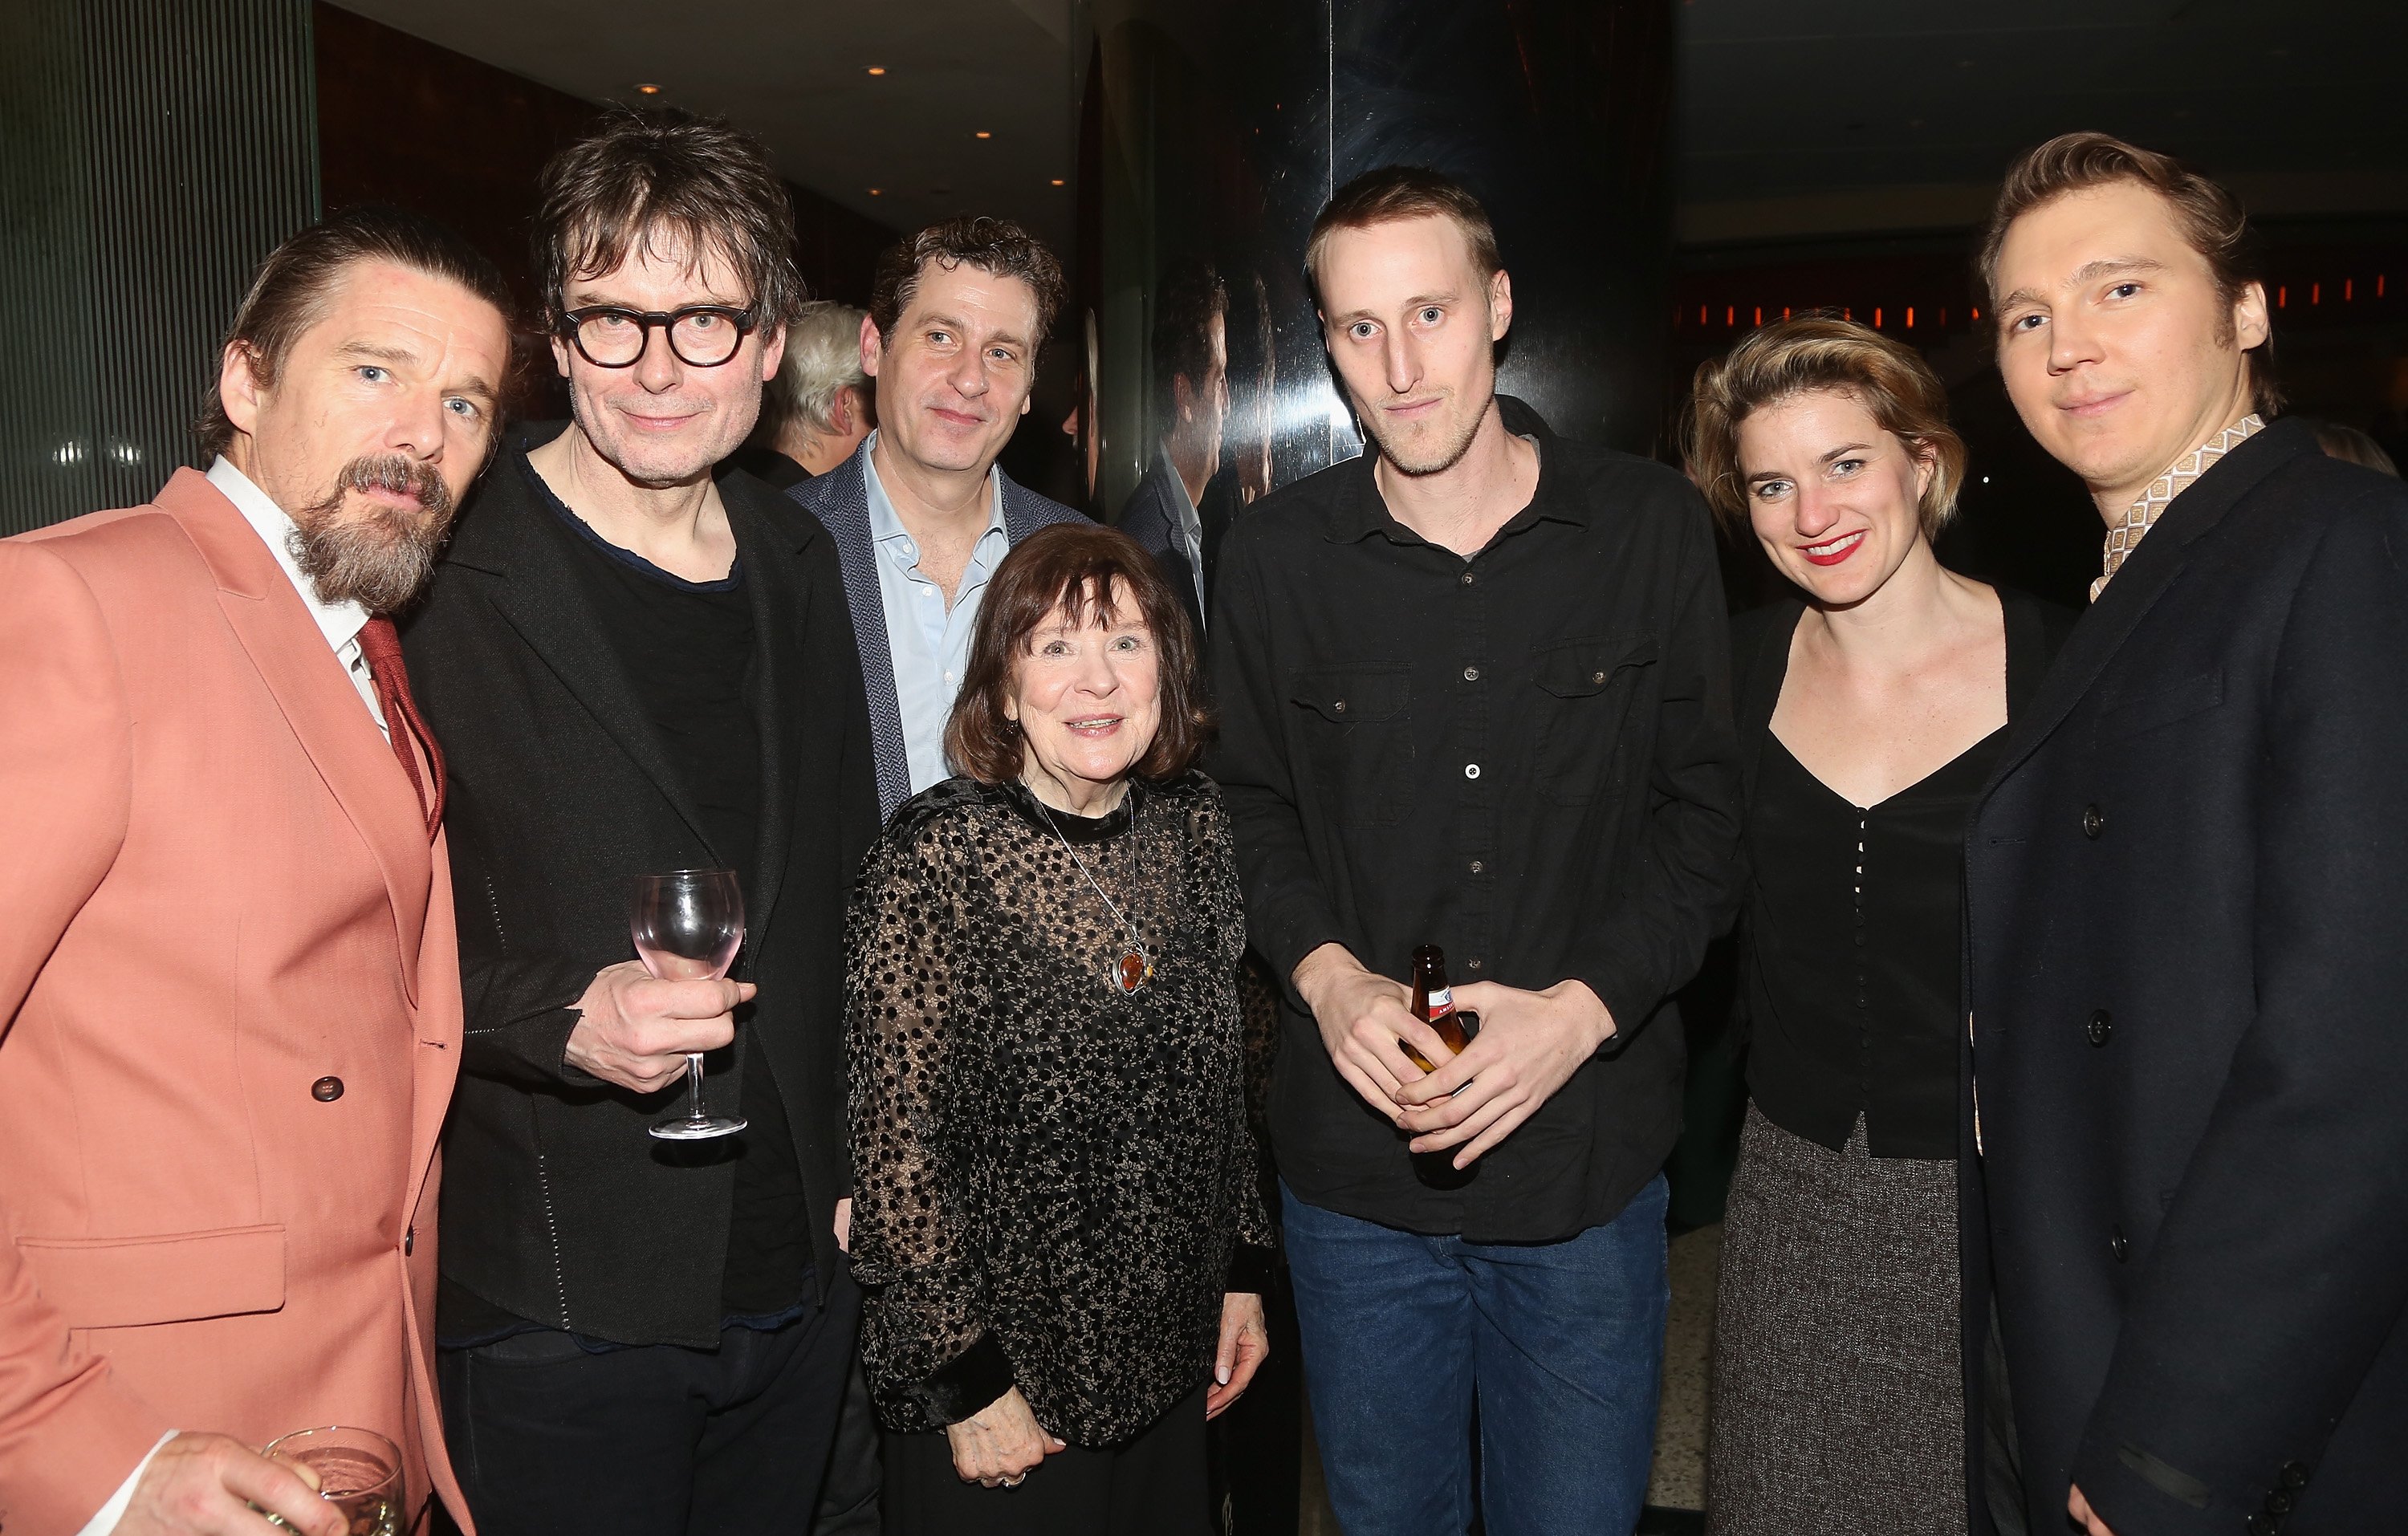 Ethan Hawke, Director James Macdonald, Gary Wilmes, Marylouise Burke, Samuel Walker Shepard, Hannah Jane Shepard and Paul Dano pose at the opening night after party for the Roundabout Theatre Company's production of Sam Shepard's "True West" on Broadway at Brasserie 8 1/2 on January 24, 2019 in New York City. | Source: Getty Images